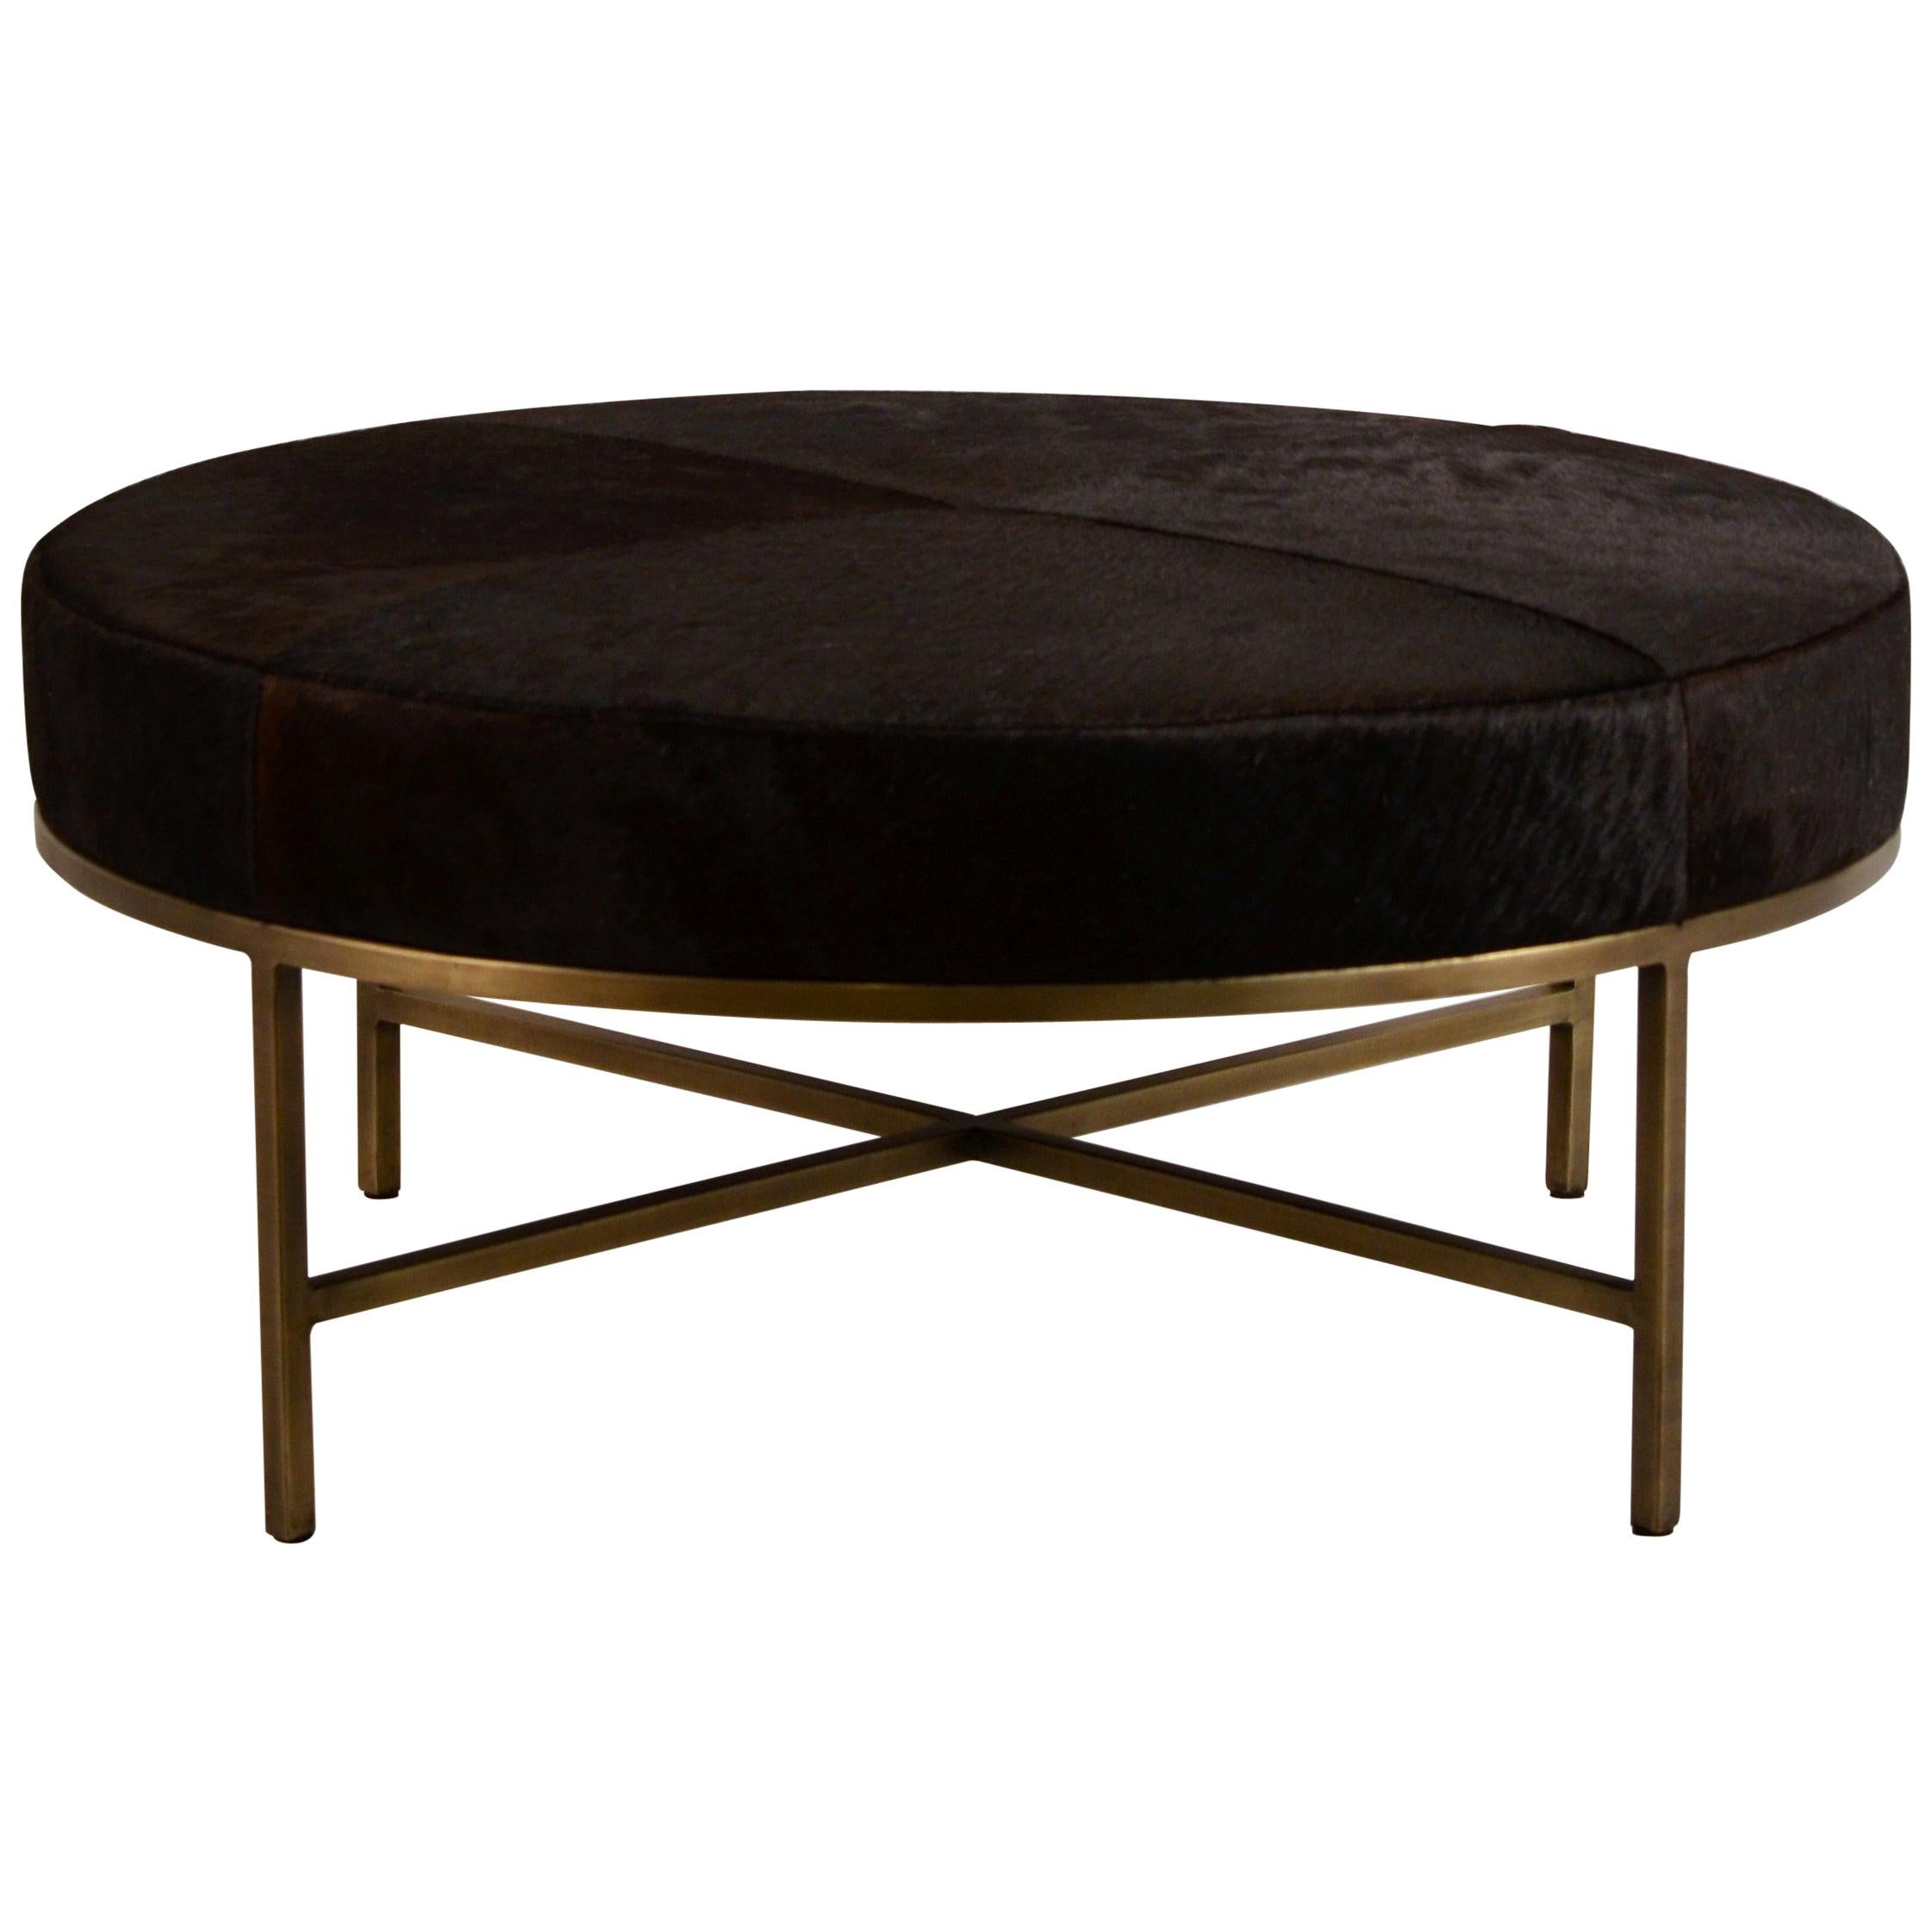 Medium 'Tambour' Ottoman by Design Frères For Sale